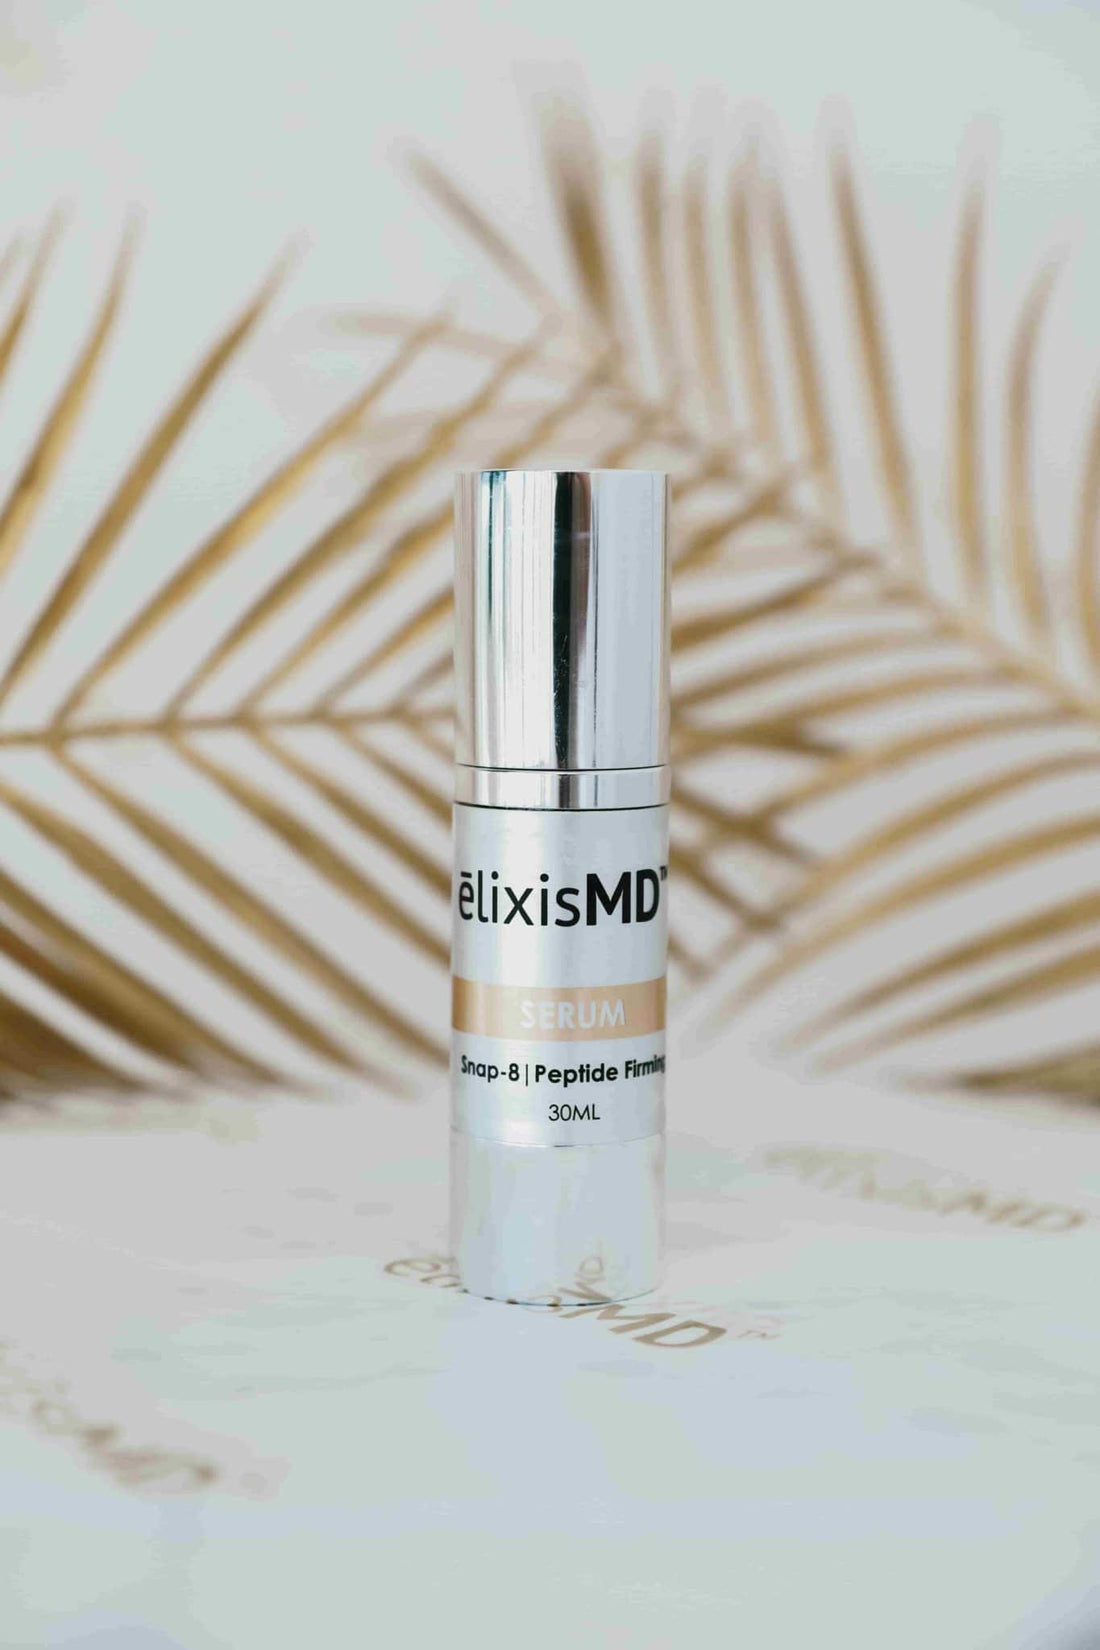 Snap-8 | Peptide Firming